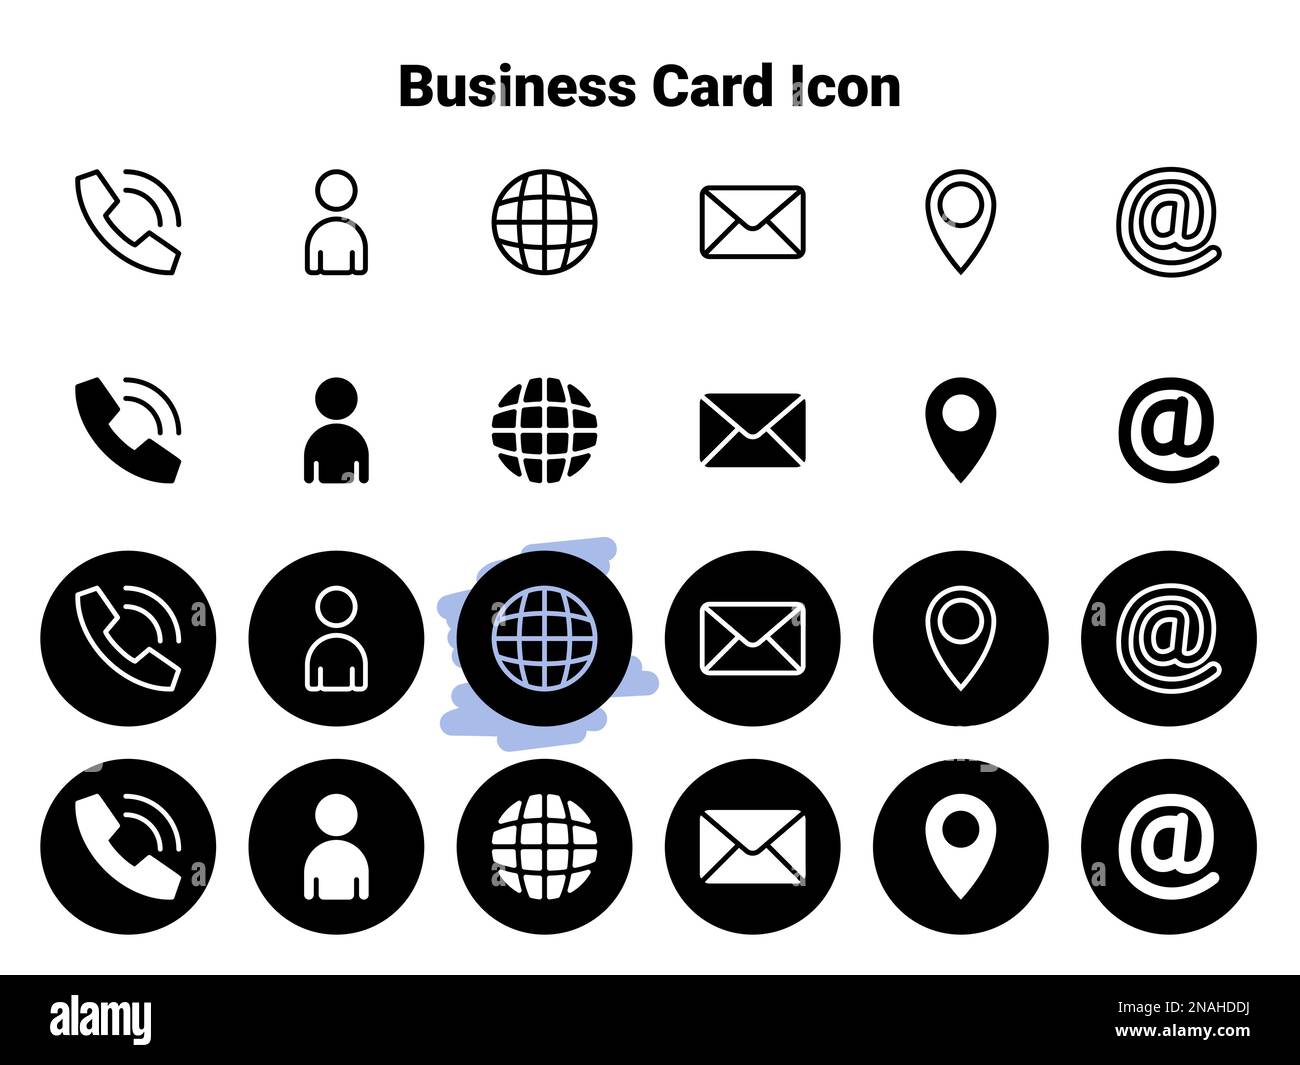 Simple vector icons. Flat illustration on a theme business card elements and symbols Stock Vector